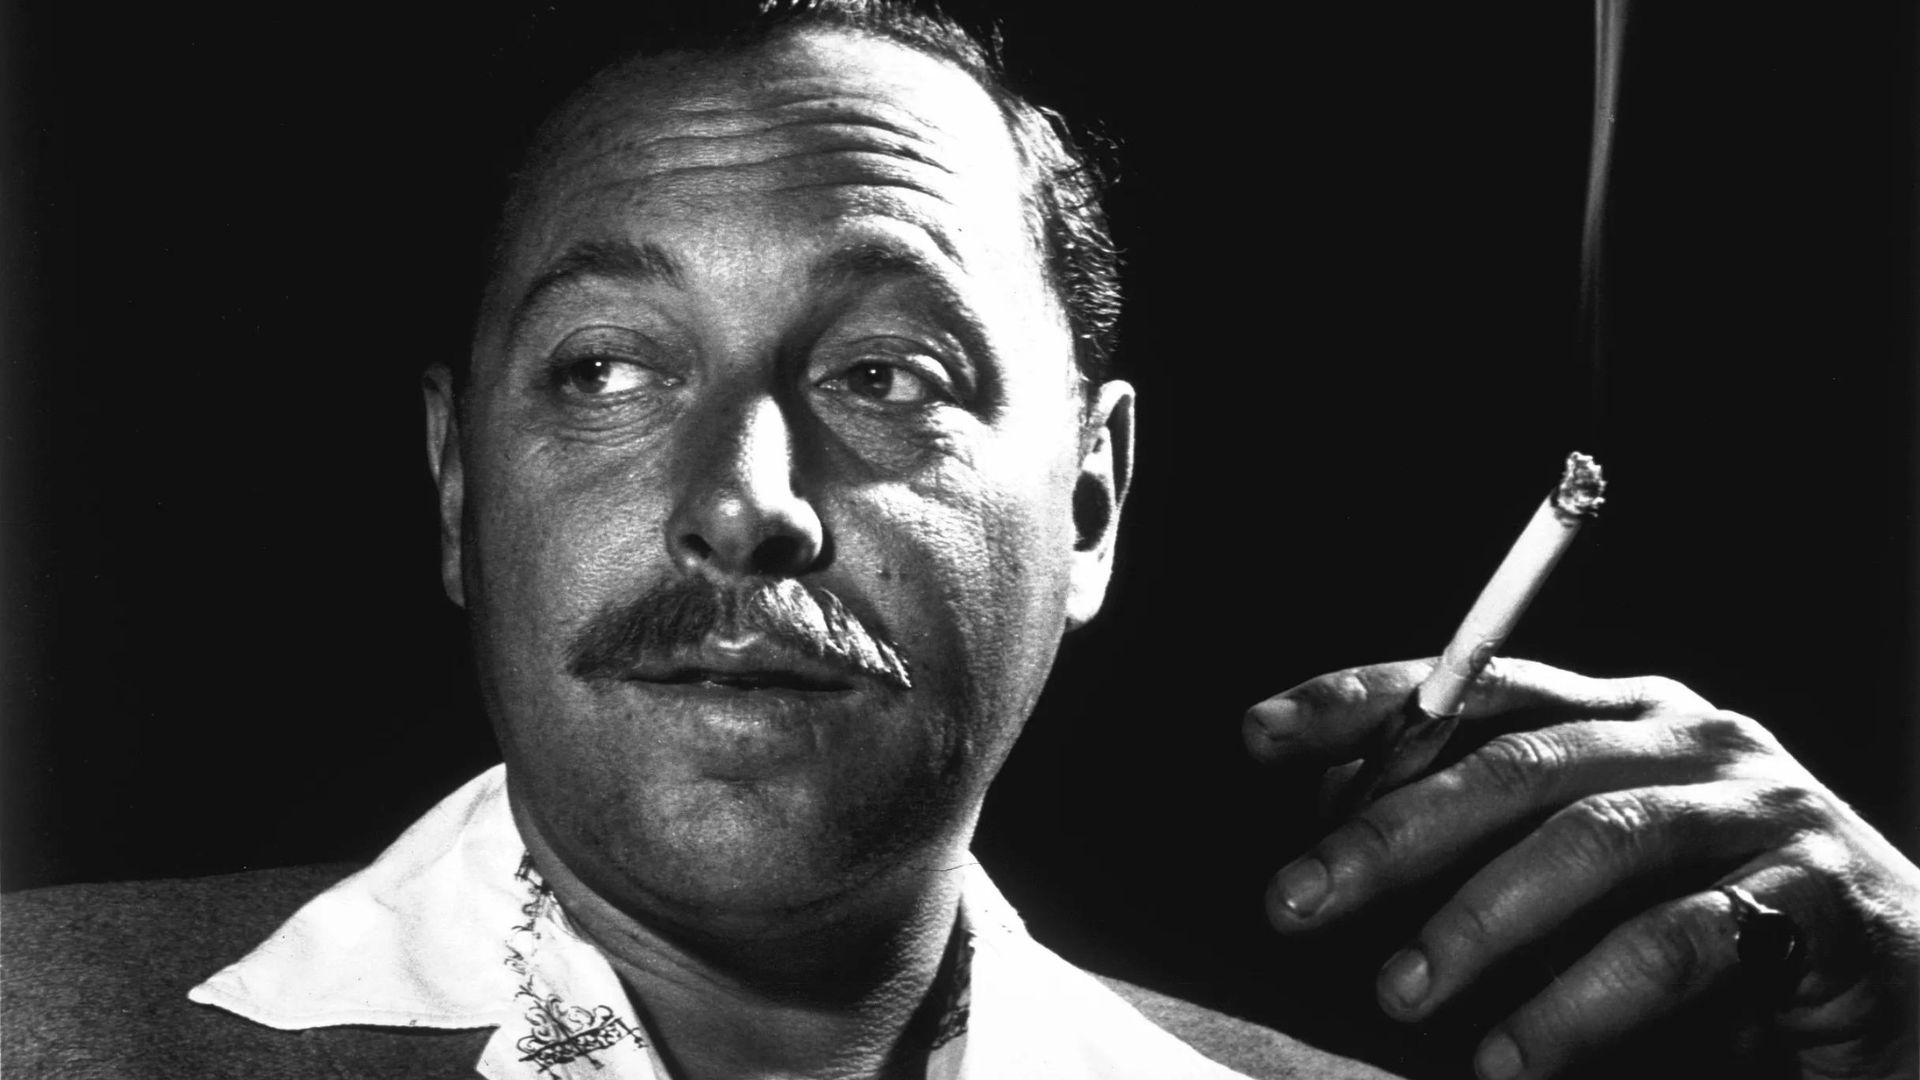 Tennessee Williams smoking a cigarette.